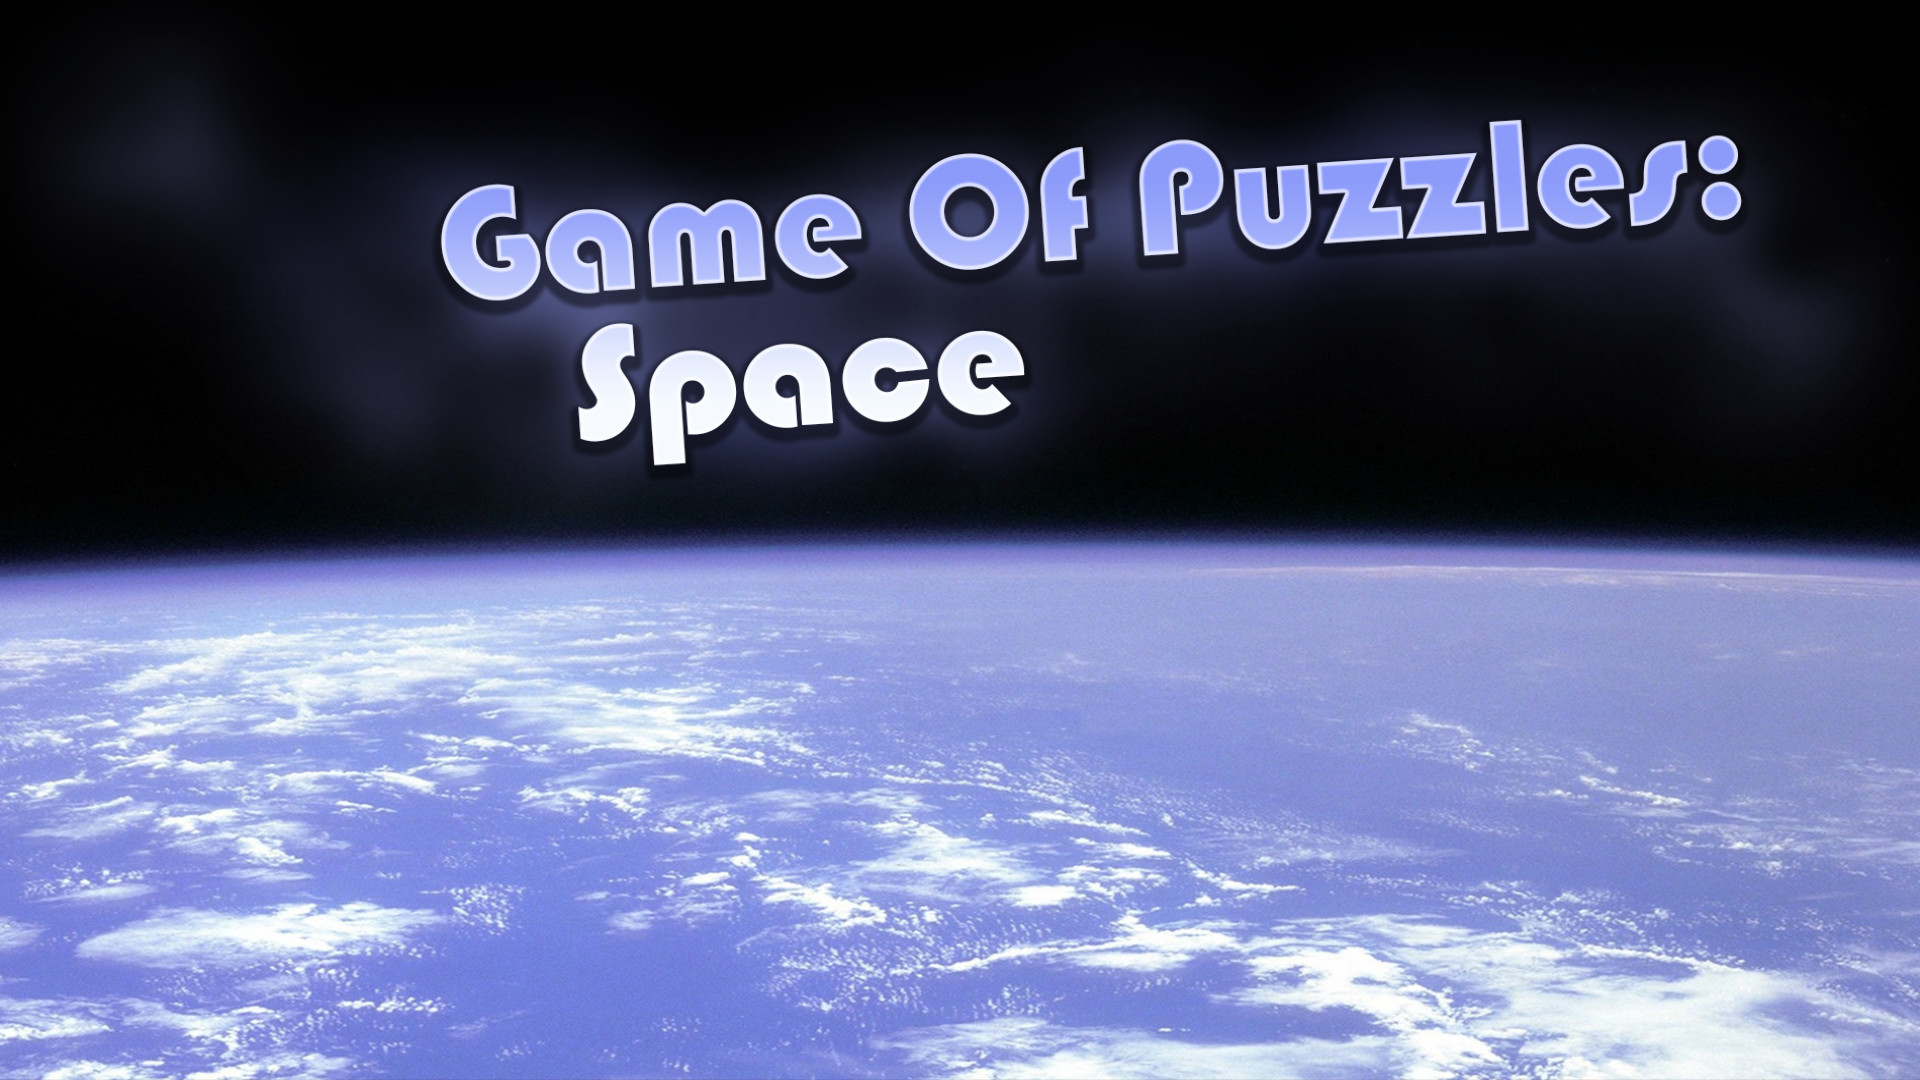 Game Of Puzzles: Space - Soundtrack Featured Screenshot #1